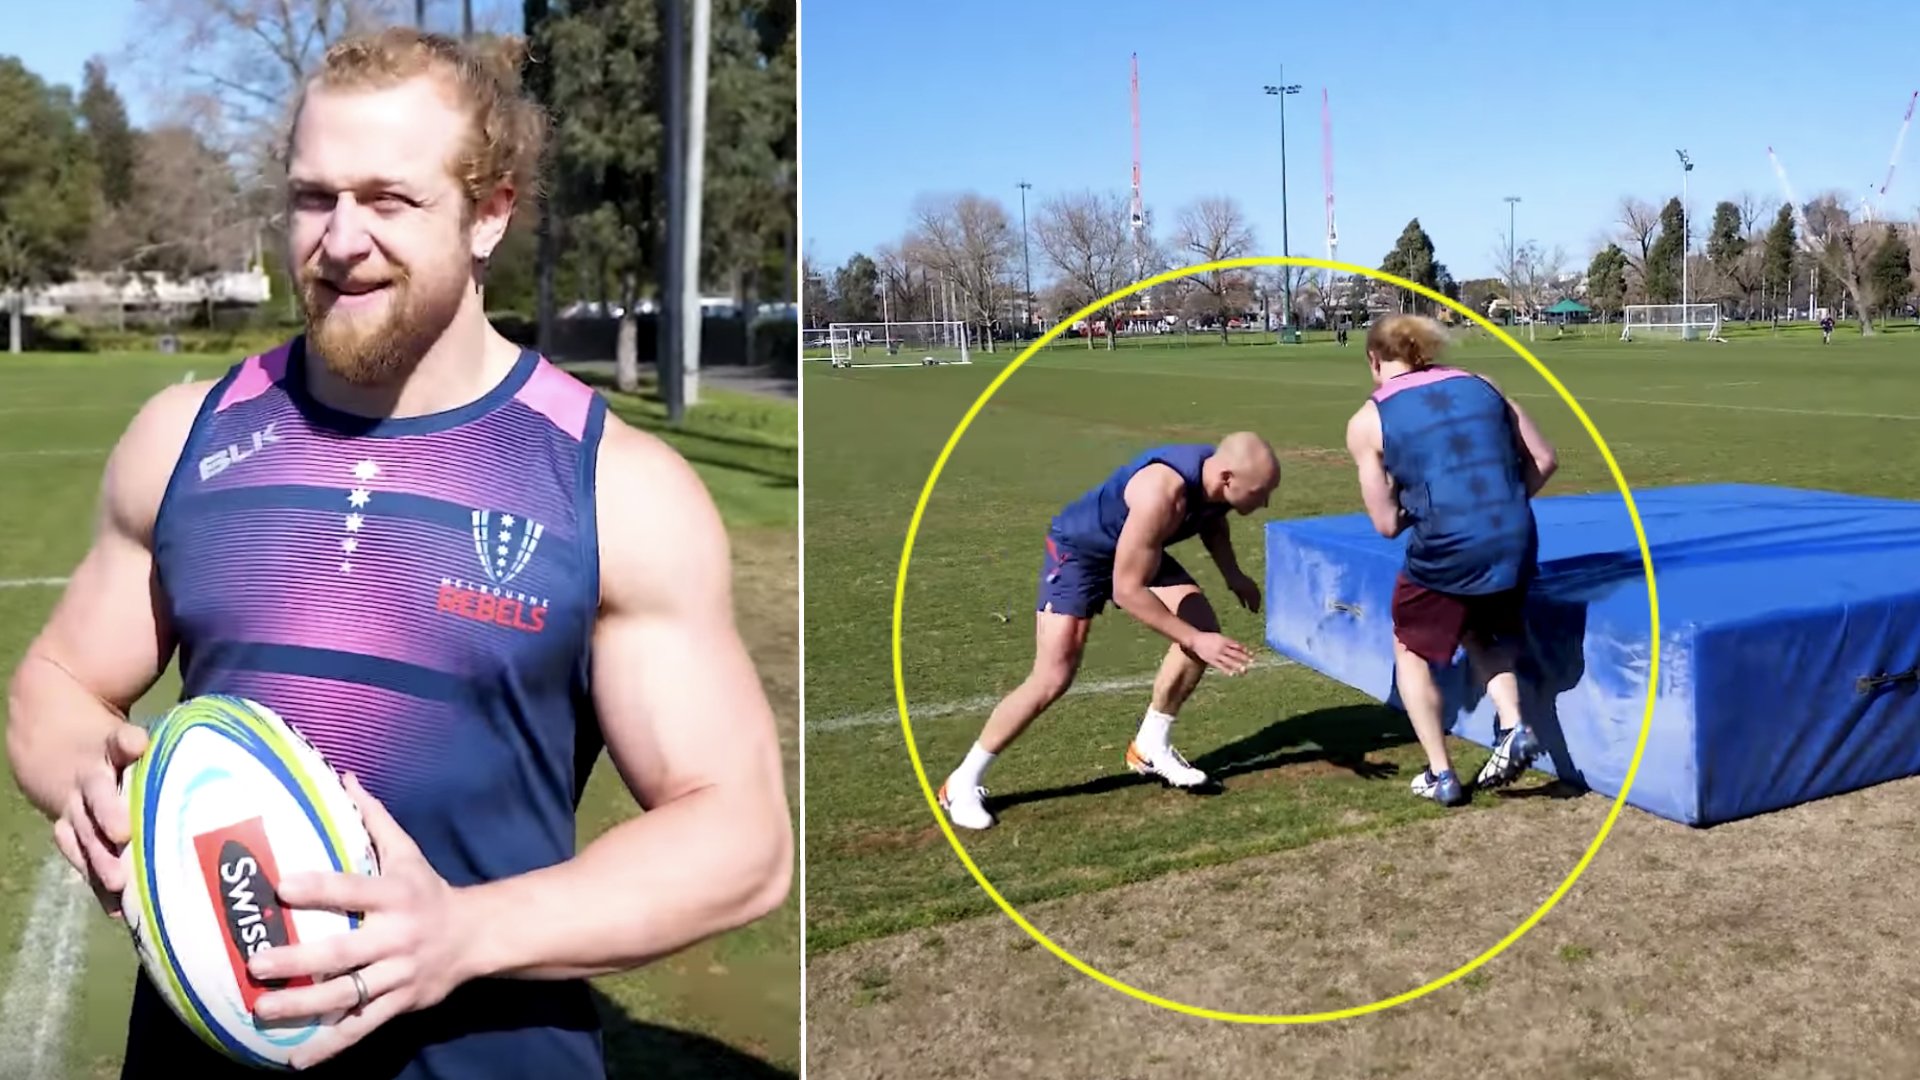 Bodybuilder experiences brutal introduction to rugby